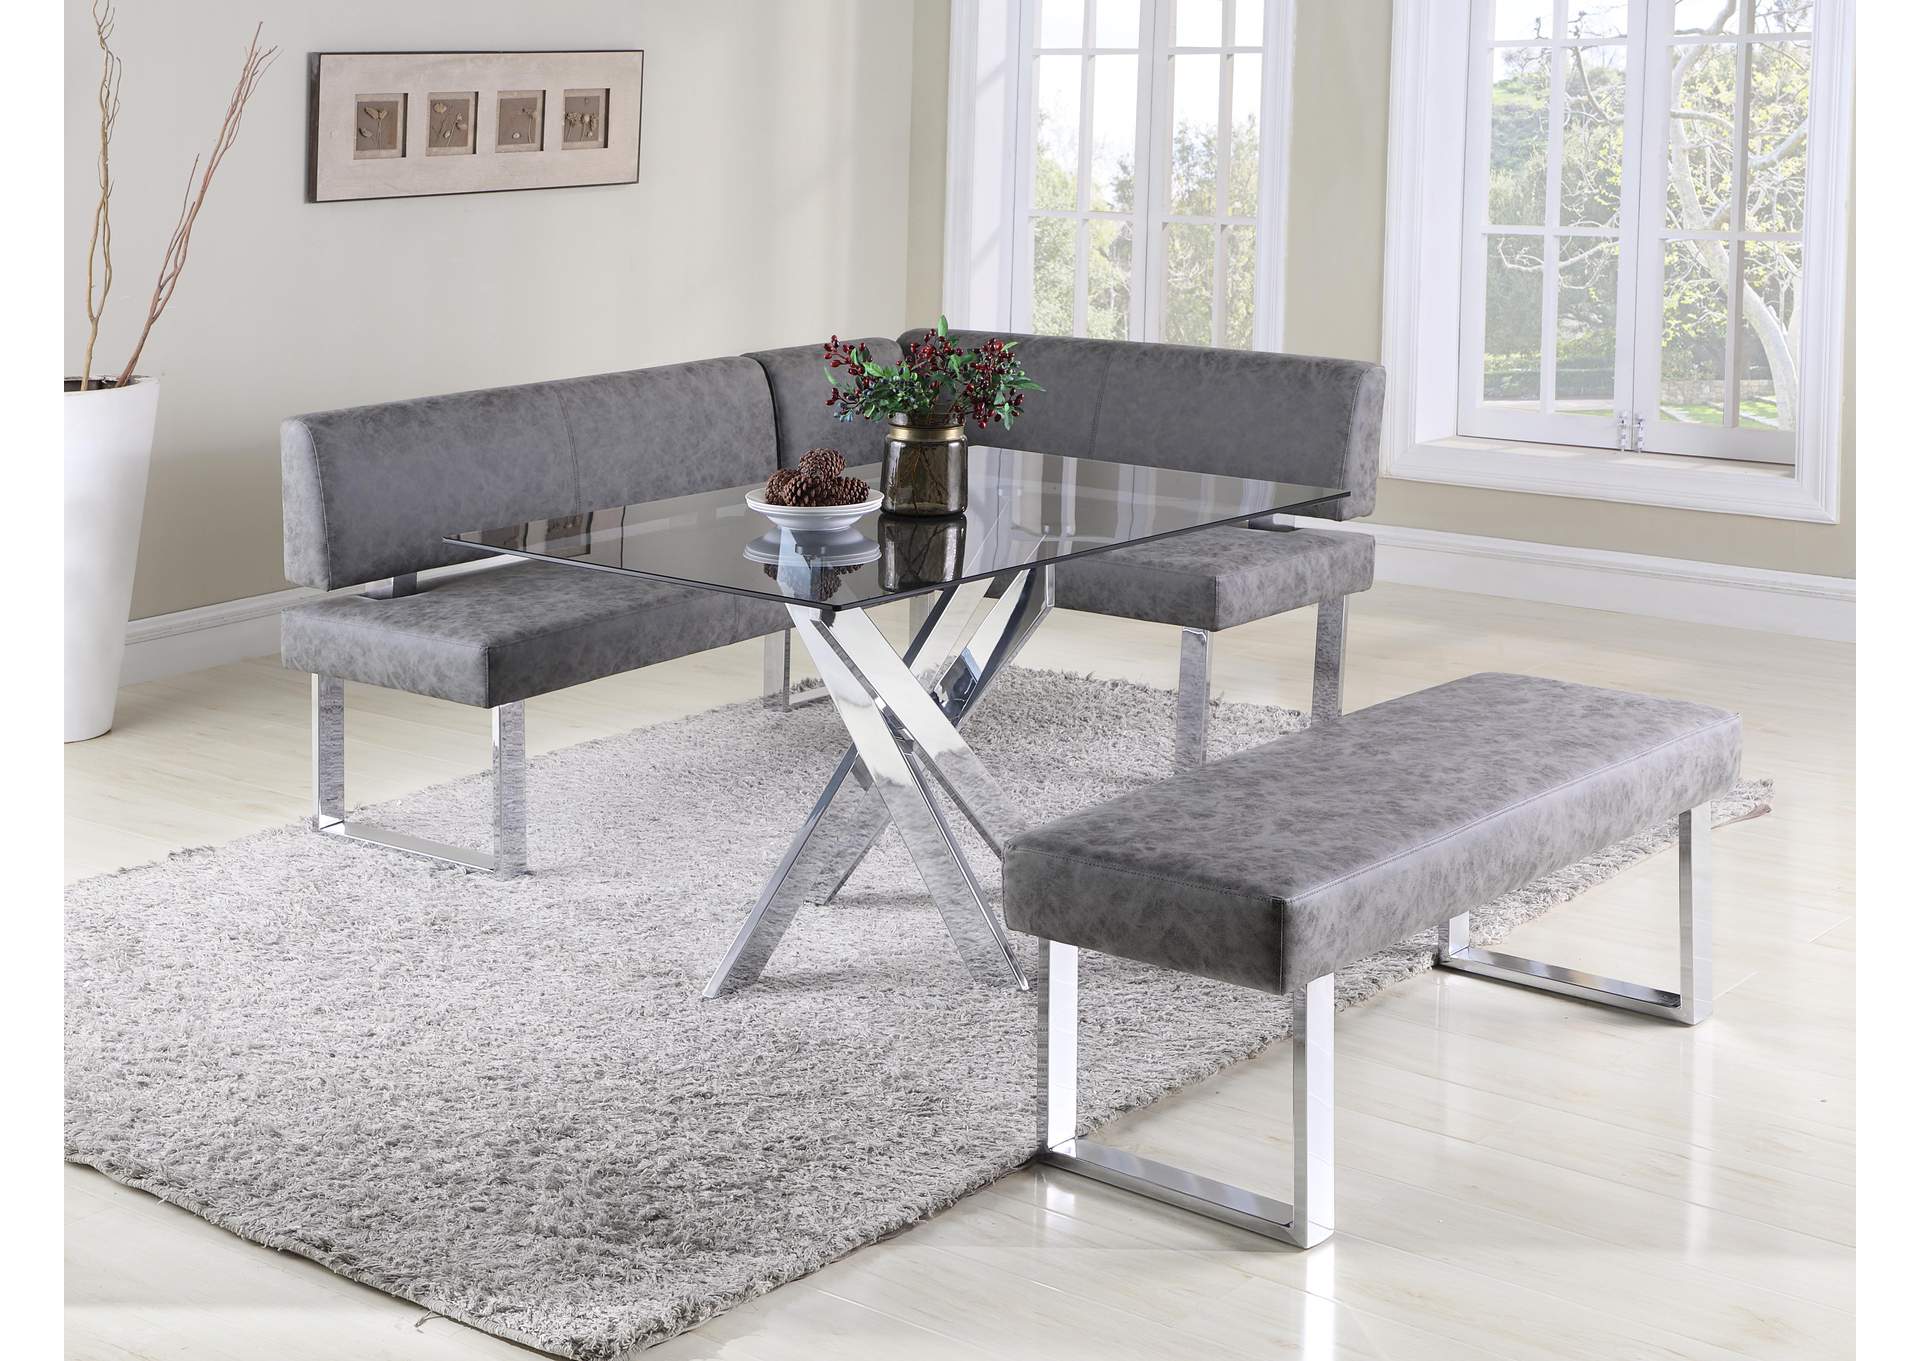 Modern Rectangular Glass Top Dining Table,Chintaly Imports